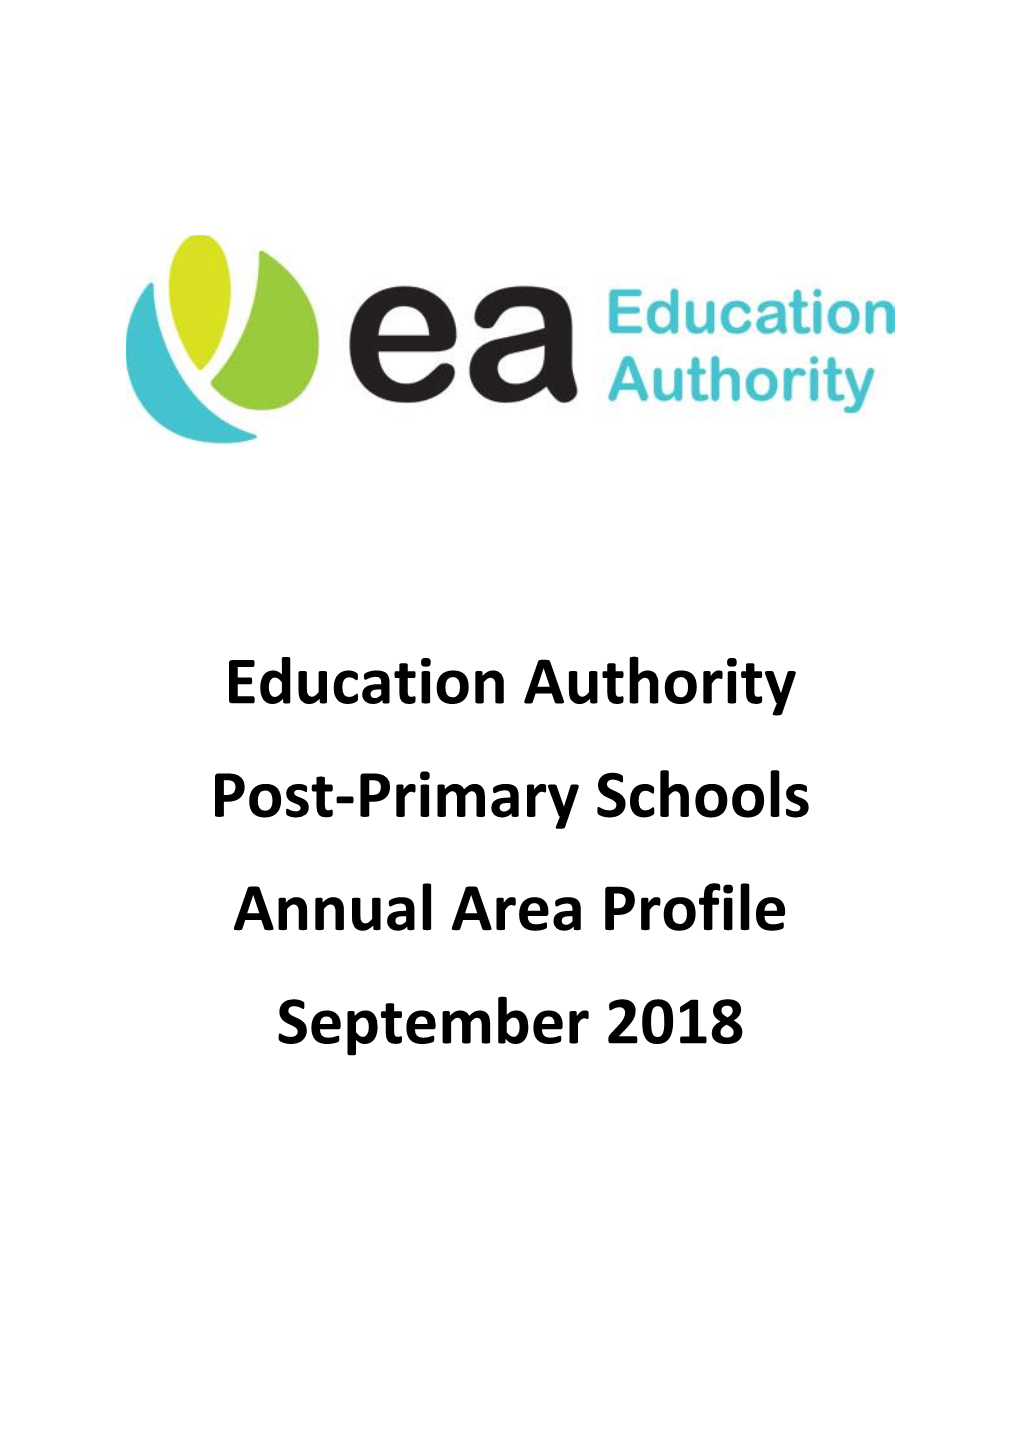 Education Authority Post-Primary Schools Annual Area Profile September 2018